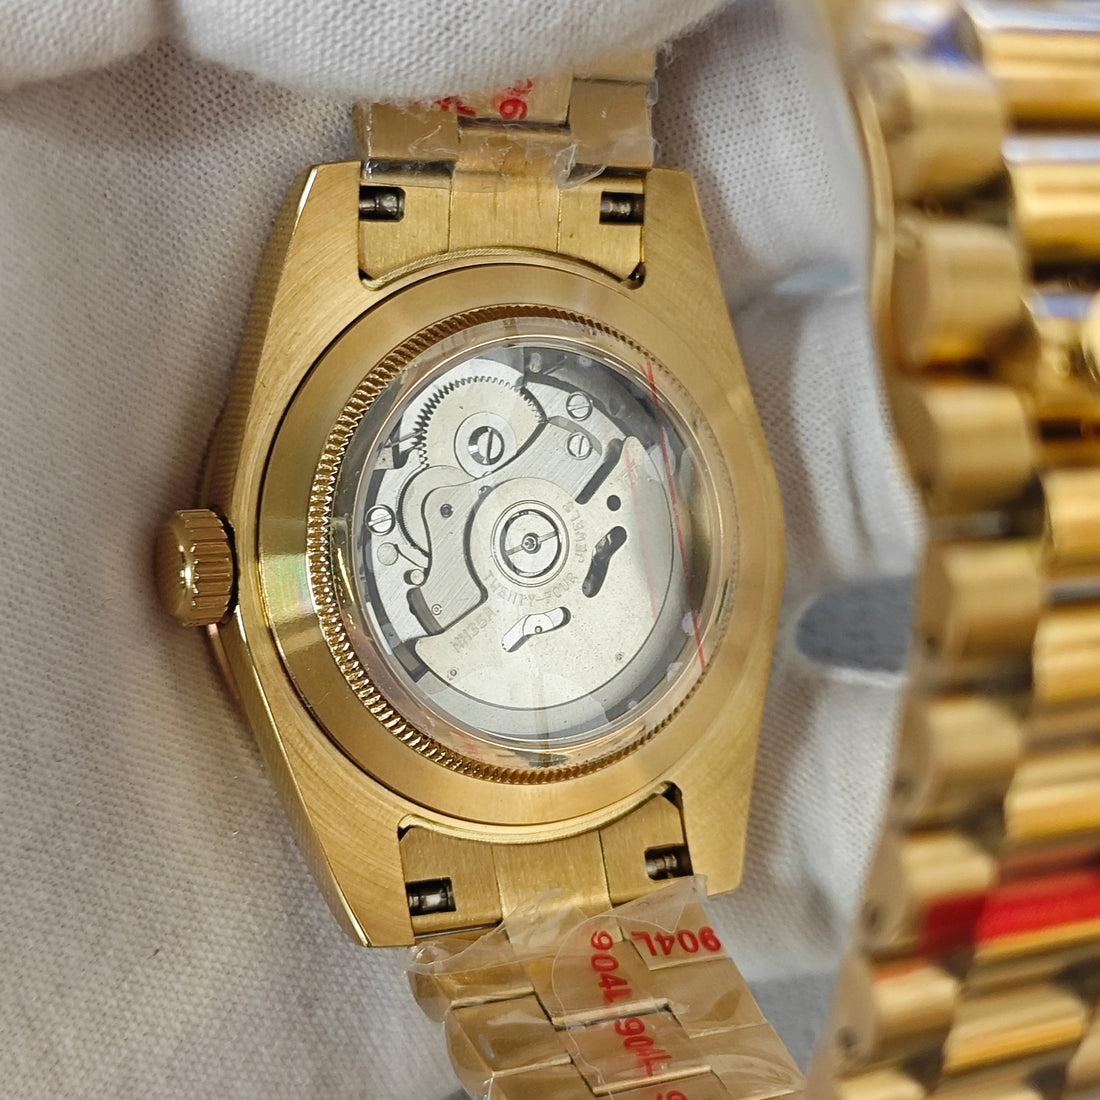 Black Dial Date Just - Fluted Bezel- Gold Tone Case - Presidential Bracelet - NH35 Automatic Movement